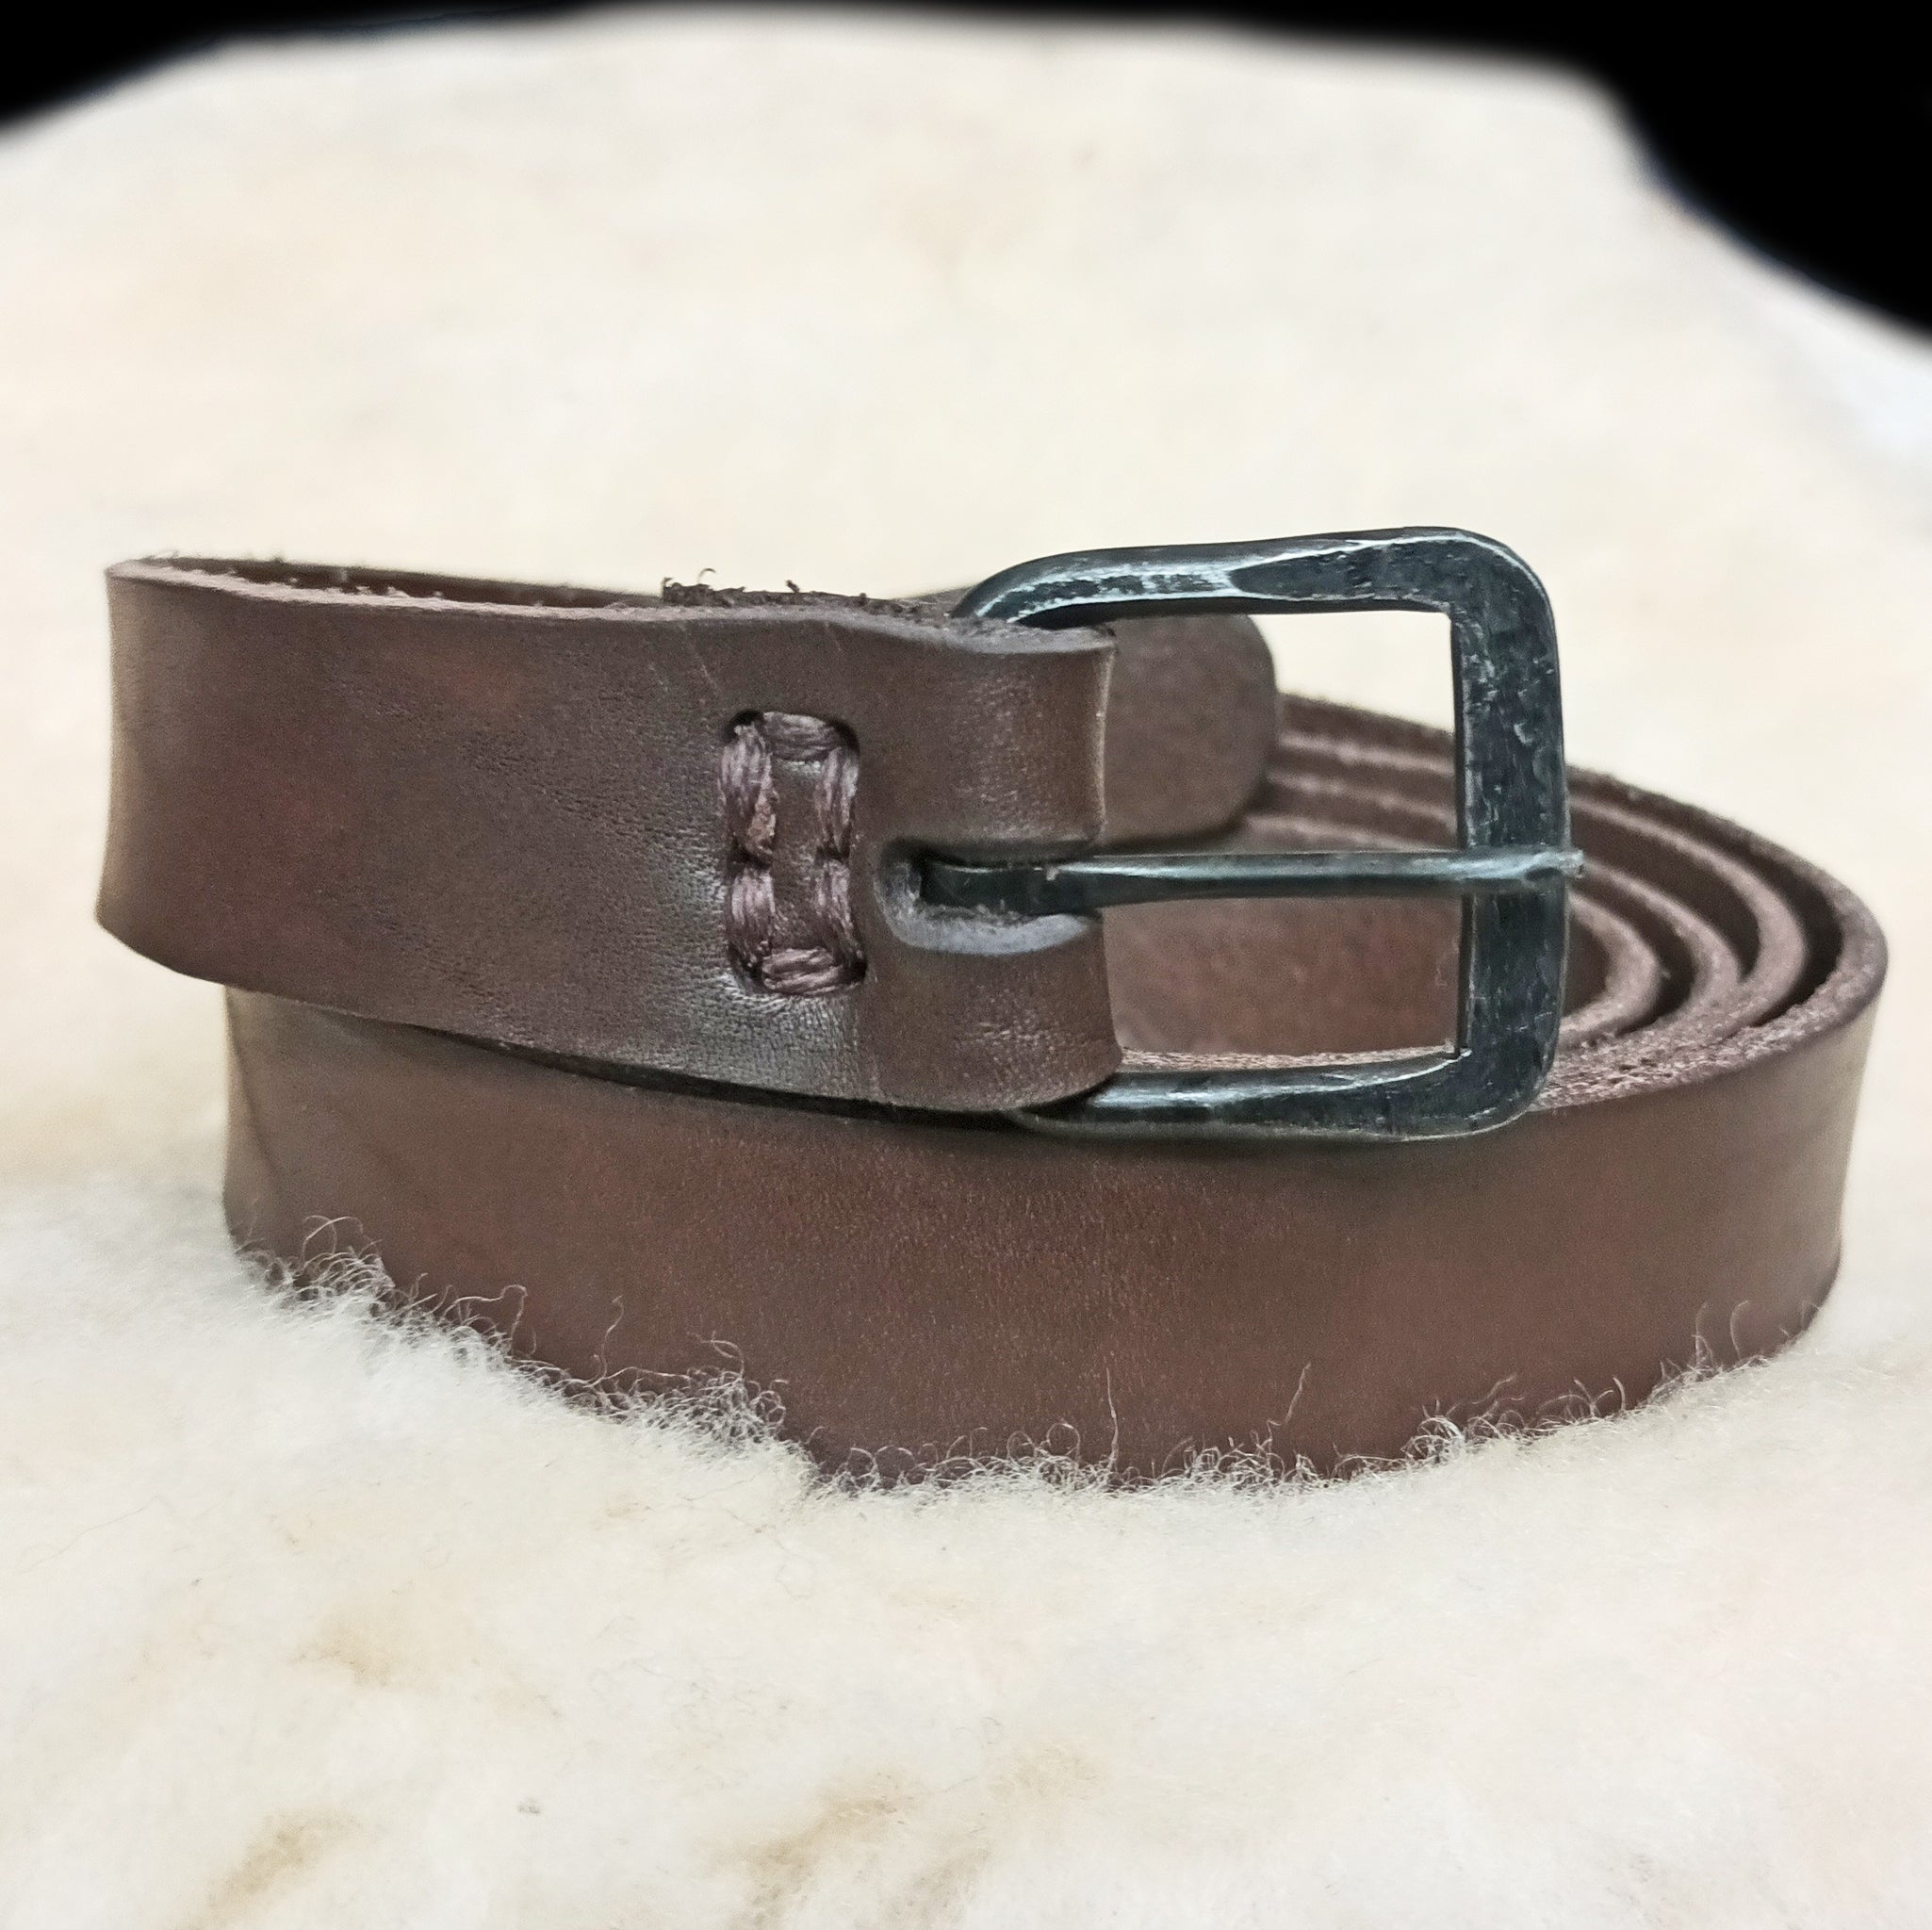 Hand-Forged Iron Viking / Medieval Buckle - 25mm (1 inch) on Brown Leather Belt